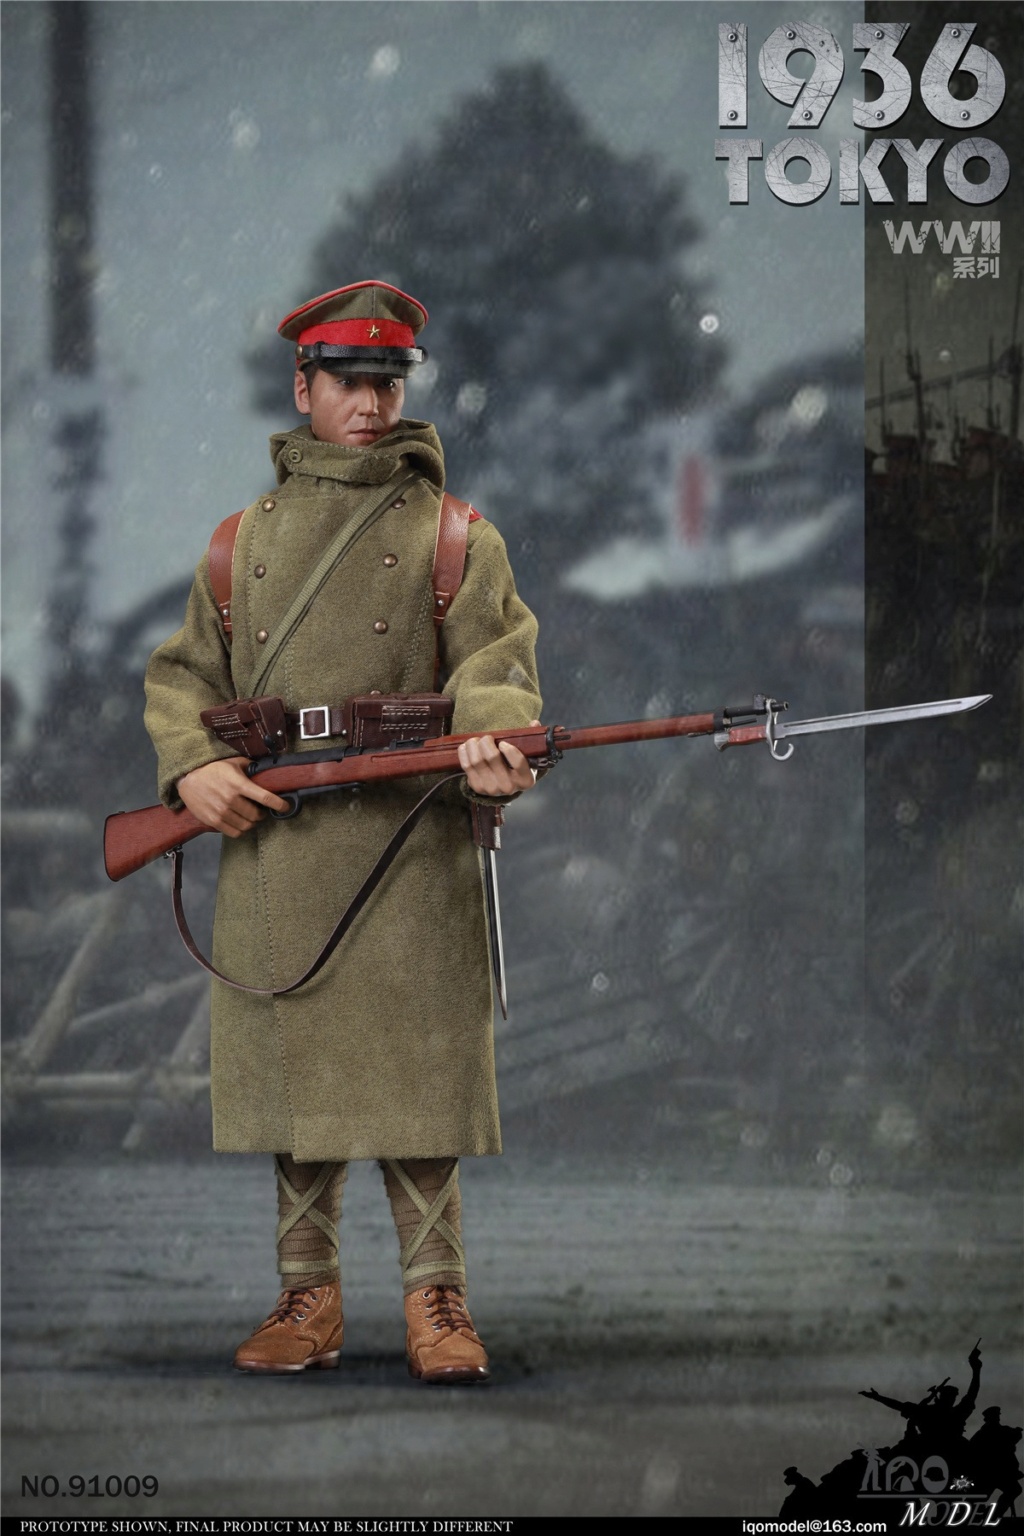 military - NEW PRODUCT: IQO Model: 1/6 WWII Series 1936 Tokyo (NO.91009) 15463613